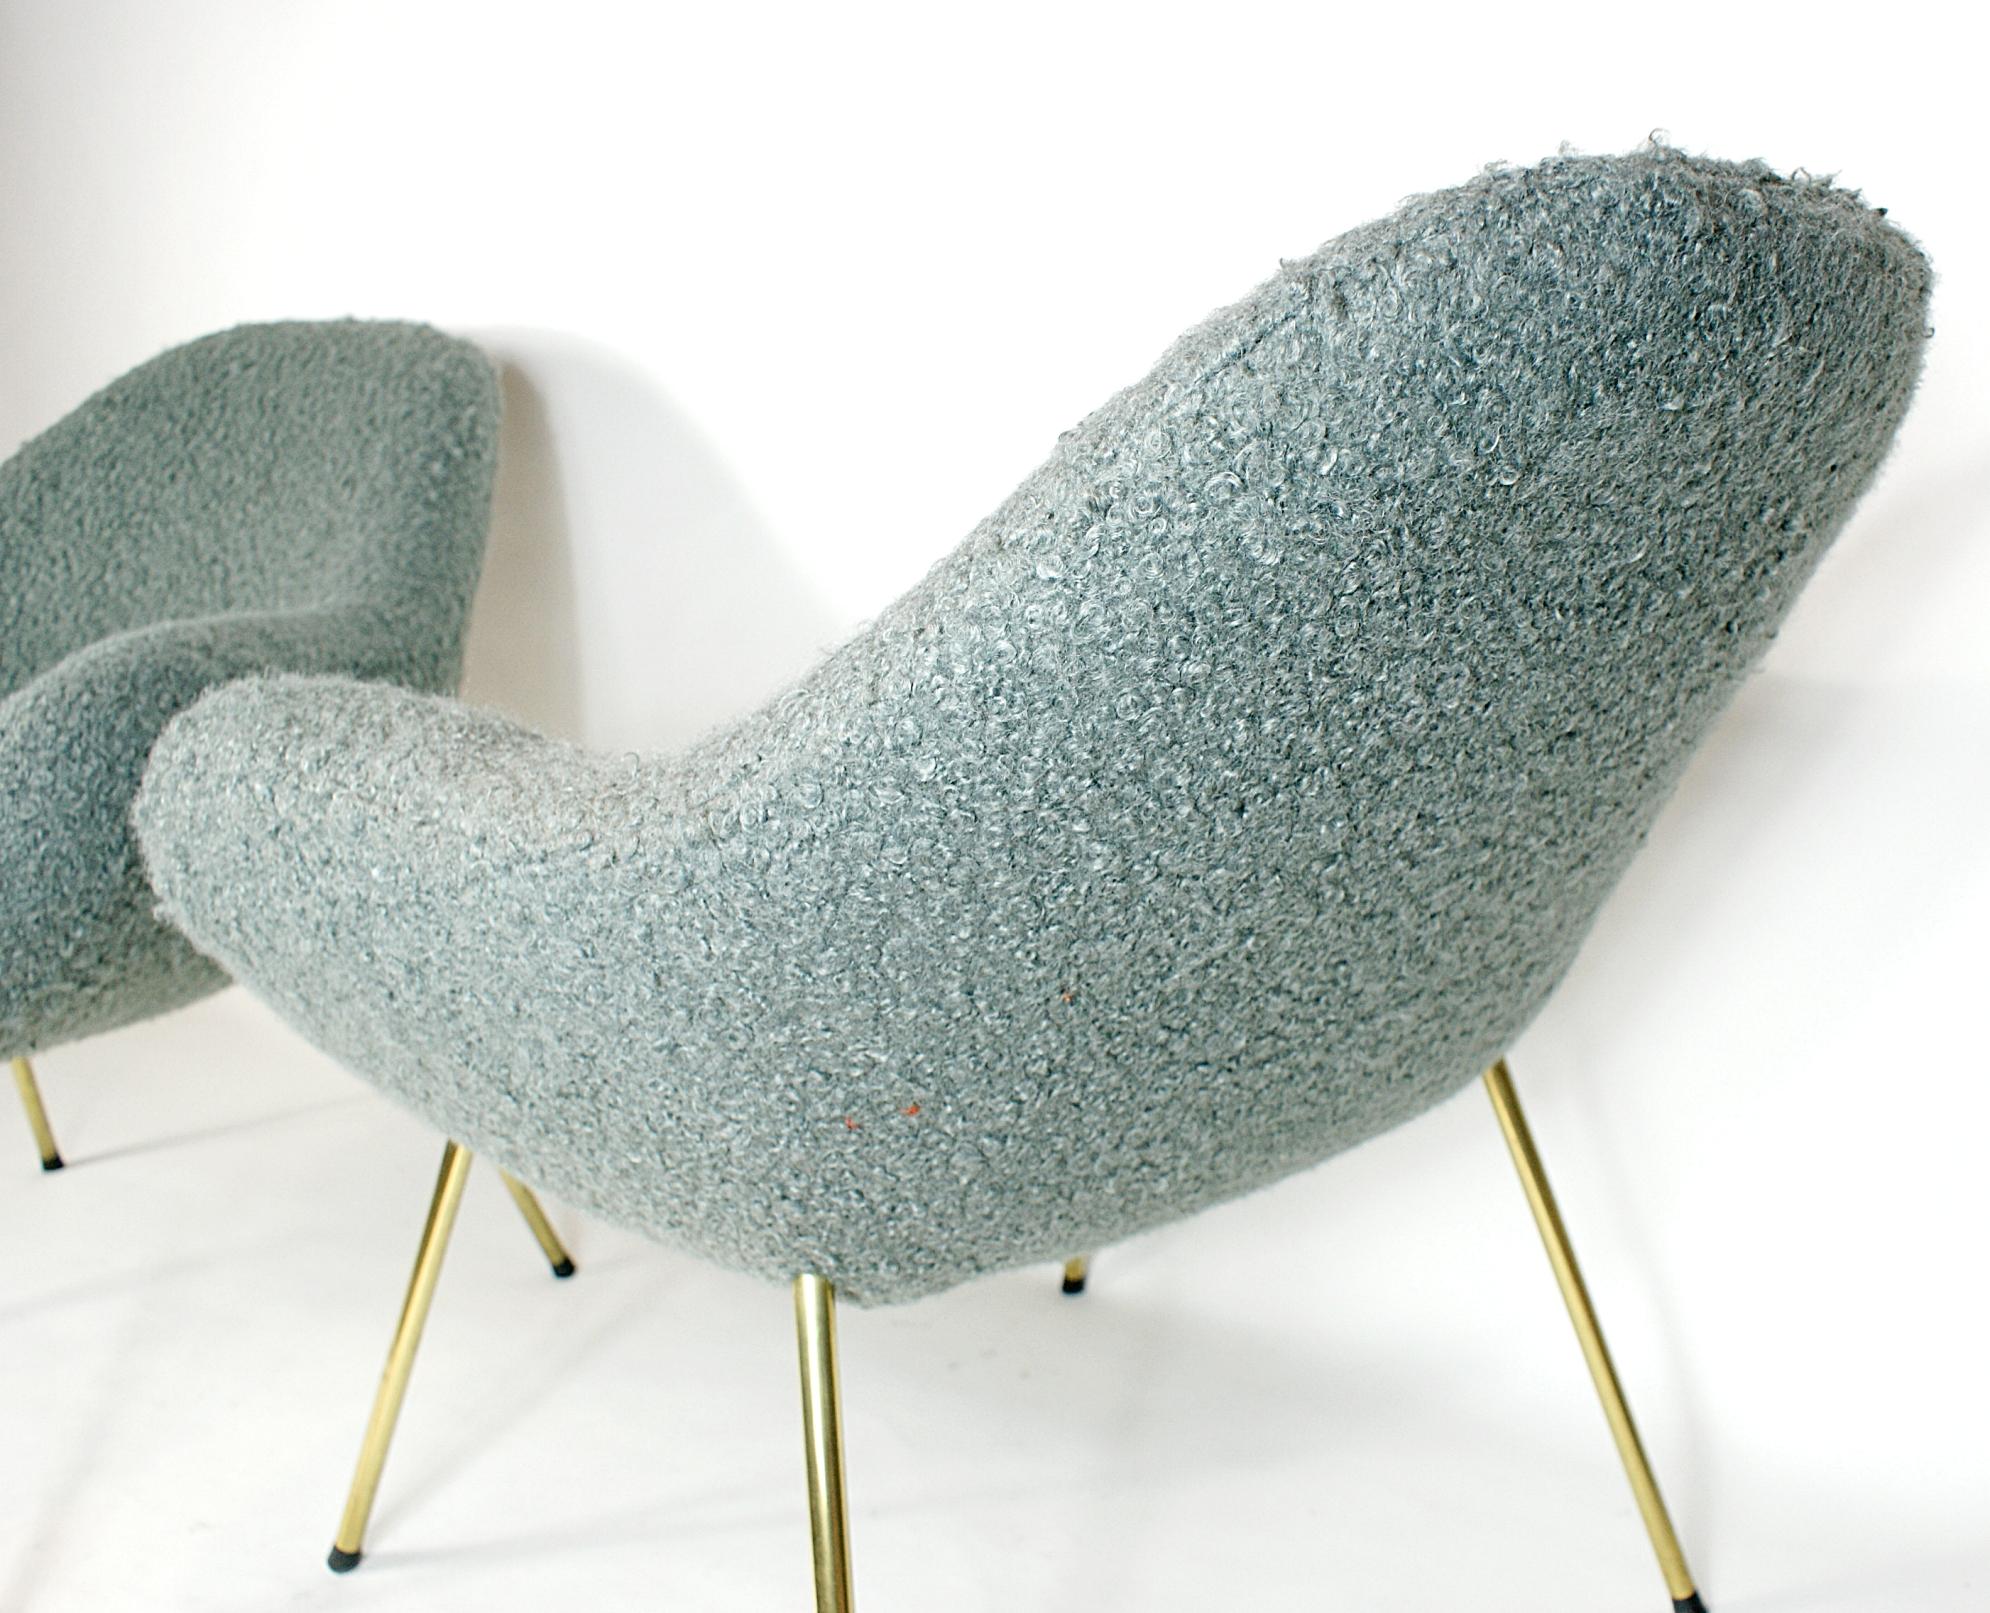 Patinated Pair of Fritz Neth Organic Midcentury Sheep Wool Lounge Chairs, 1960s, Germany For Sale